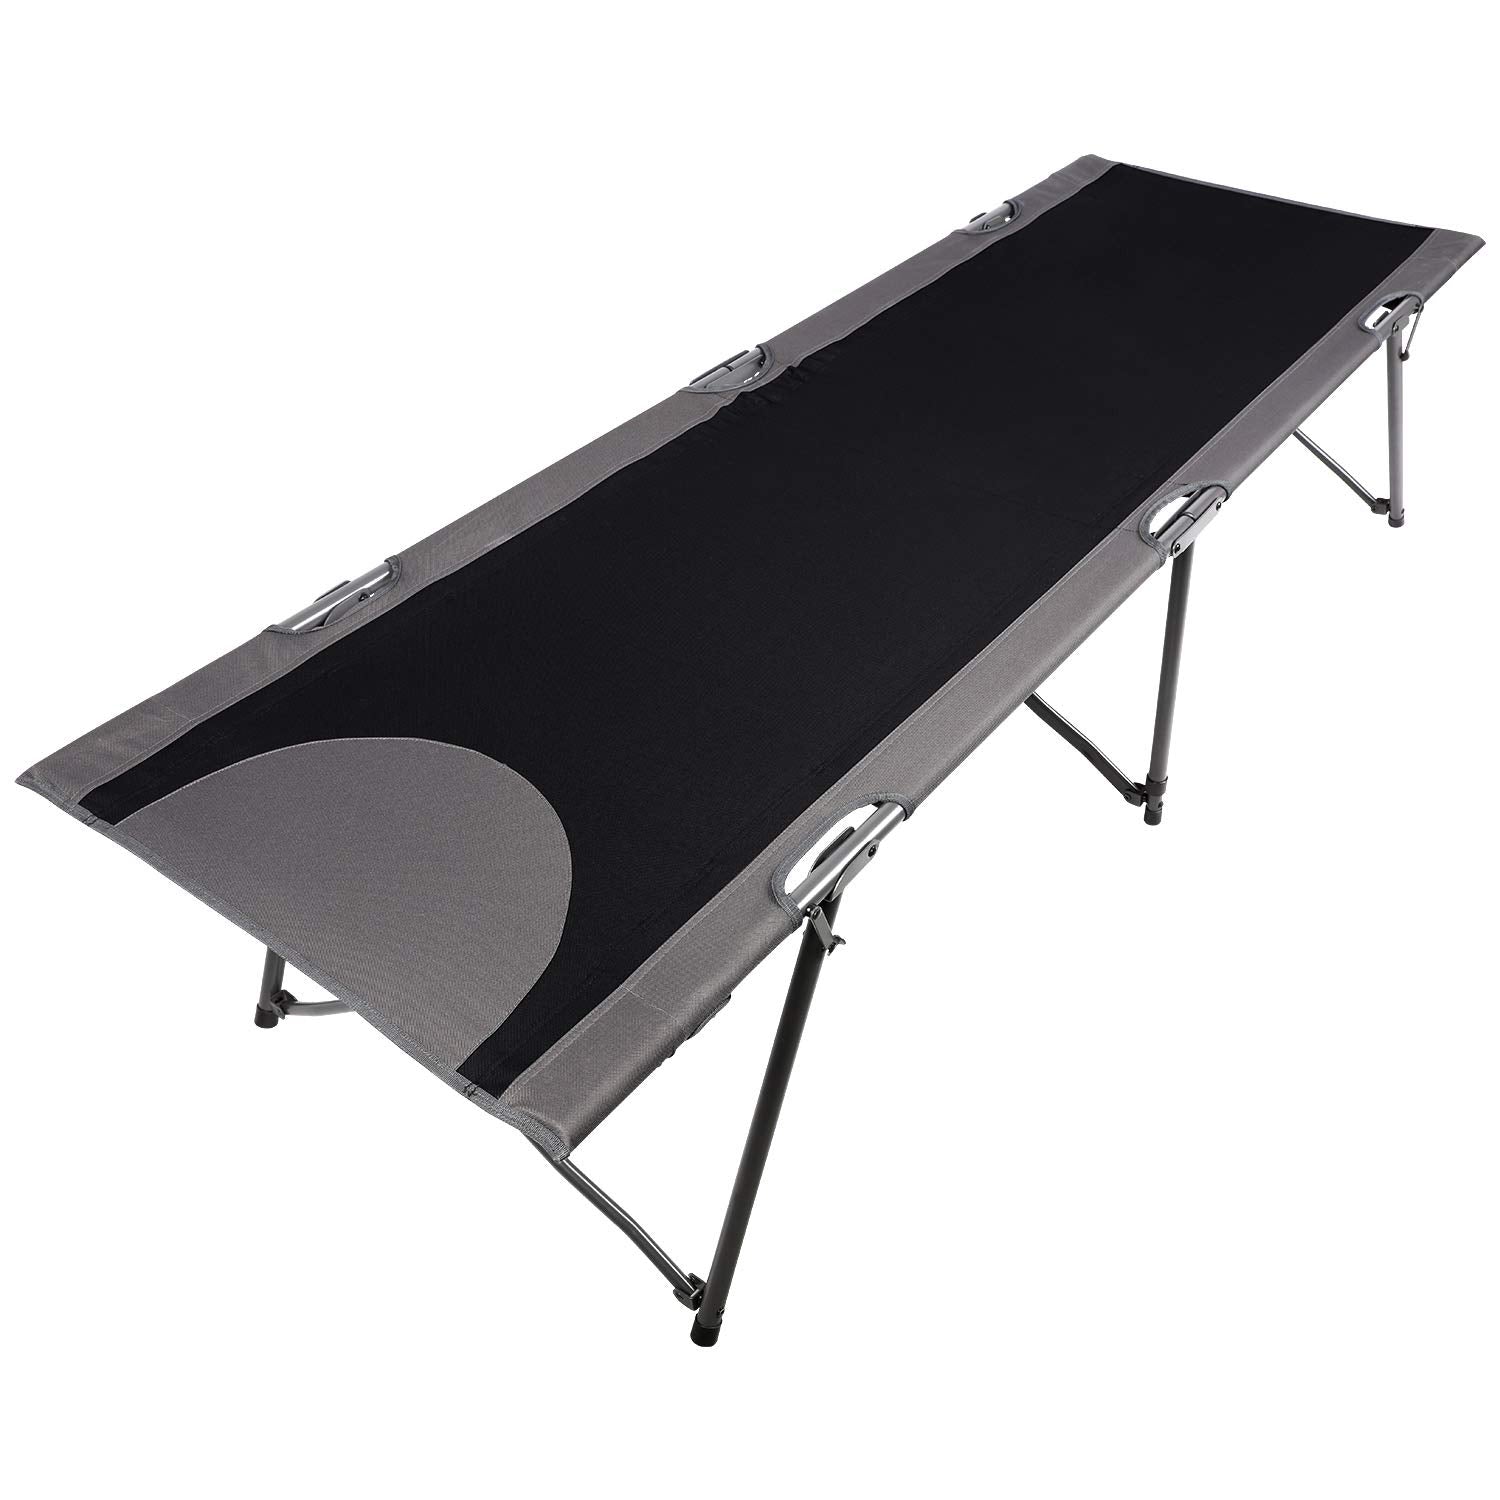 PORTAL Folding Portable Camping Cot, Travel Military Adult Cot with Carry Bag, Support 300lbs for Indoor & Outdoor Use